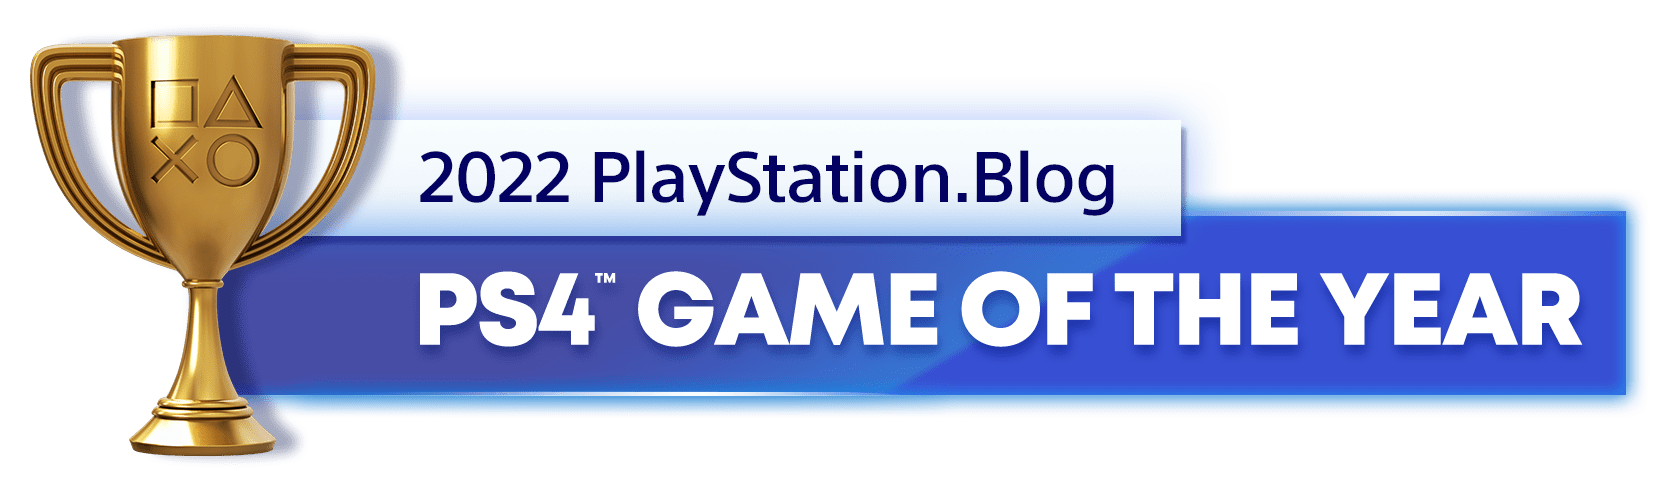 ps4 games 2022 list